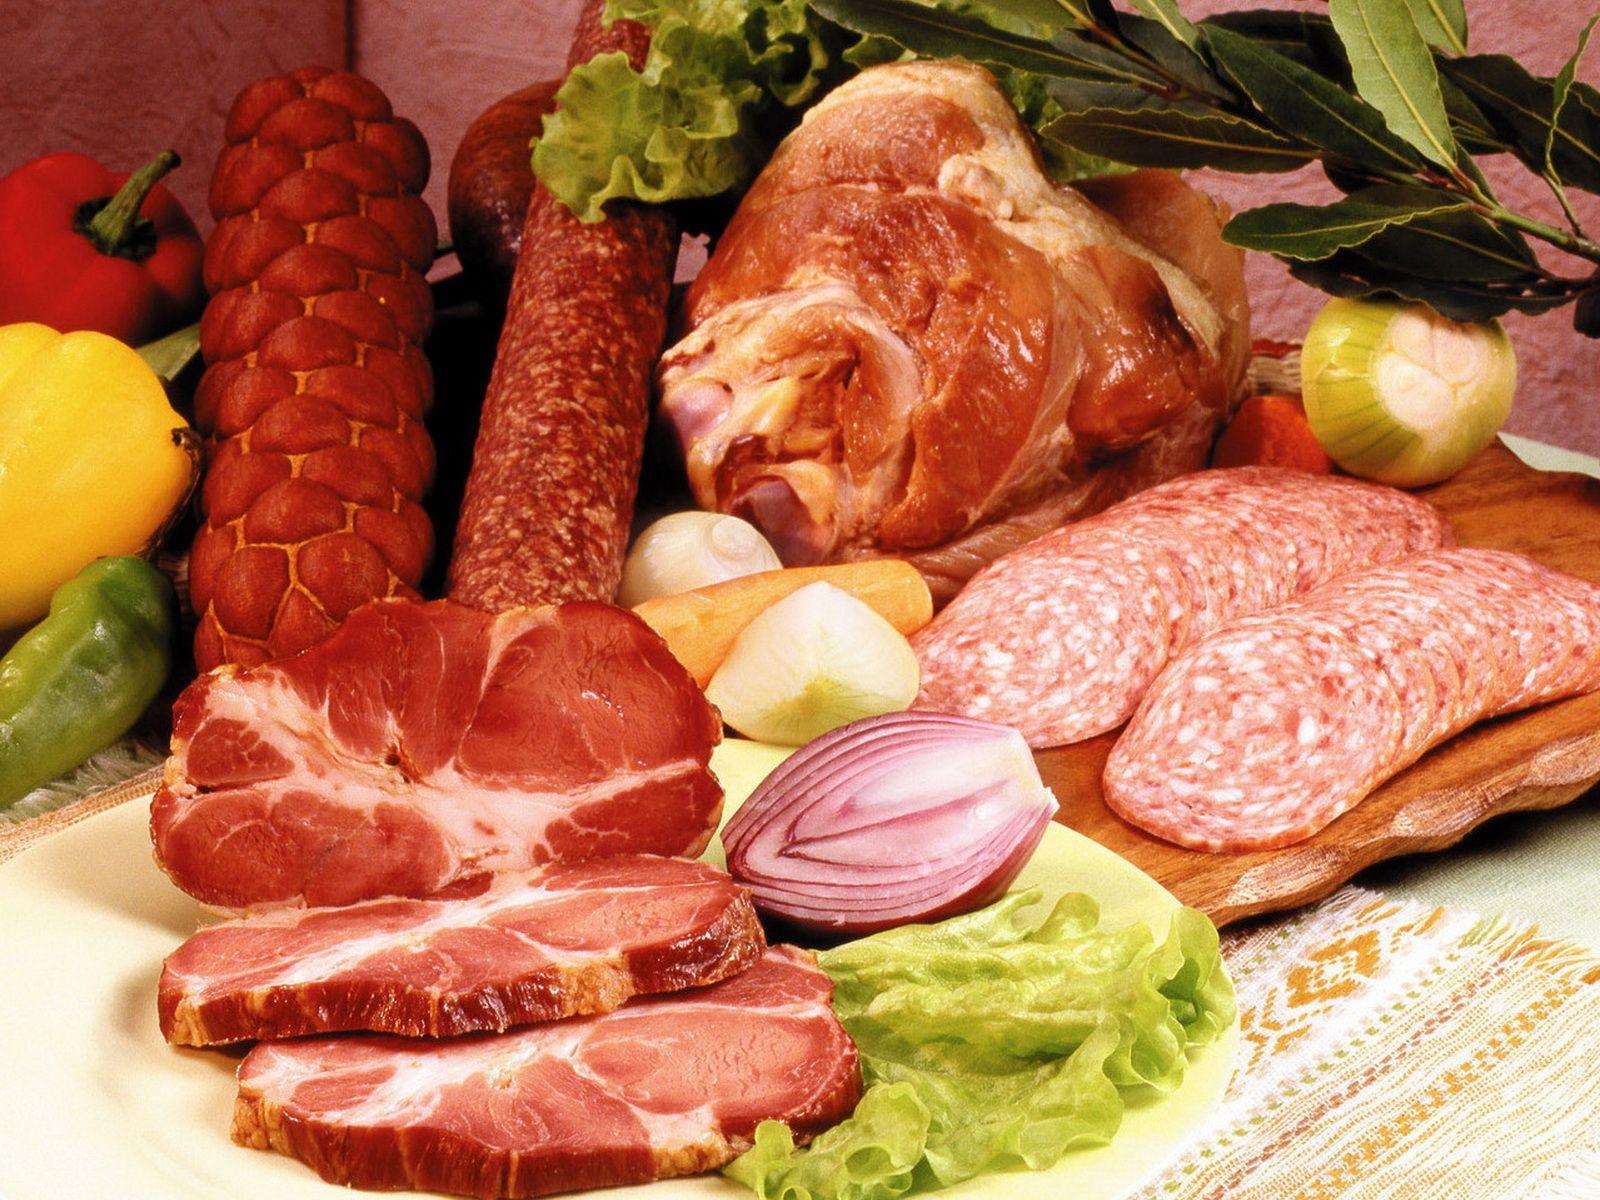 Meat variety wallpaper and image, picture, photo